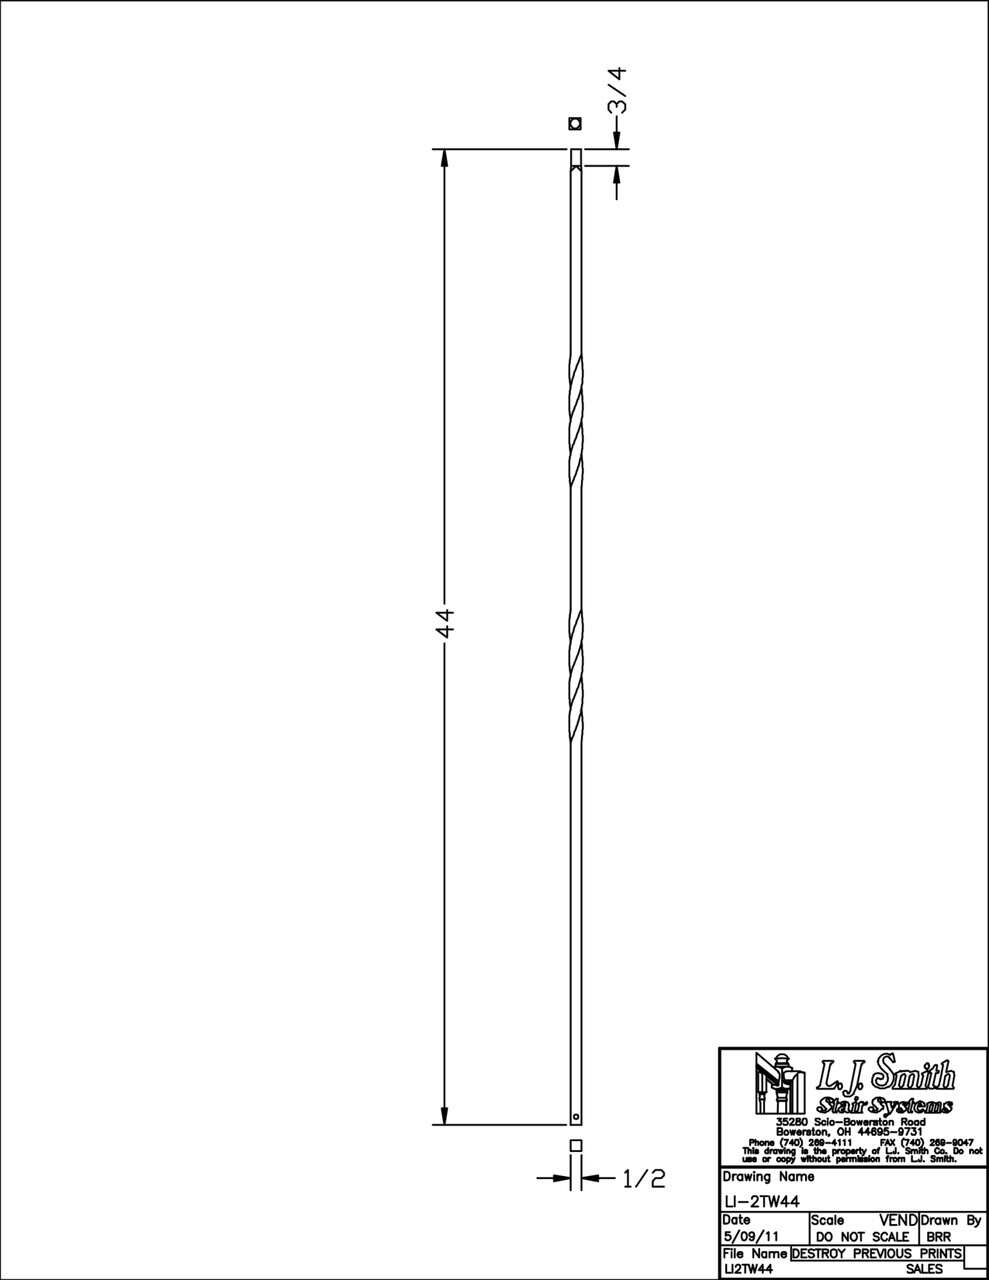 LI-2TW44 — Double Twist Baluster (1/2" Square Solid)